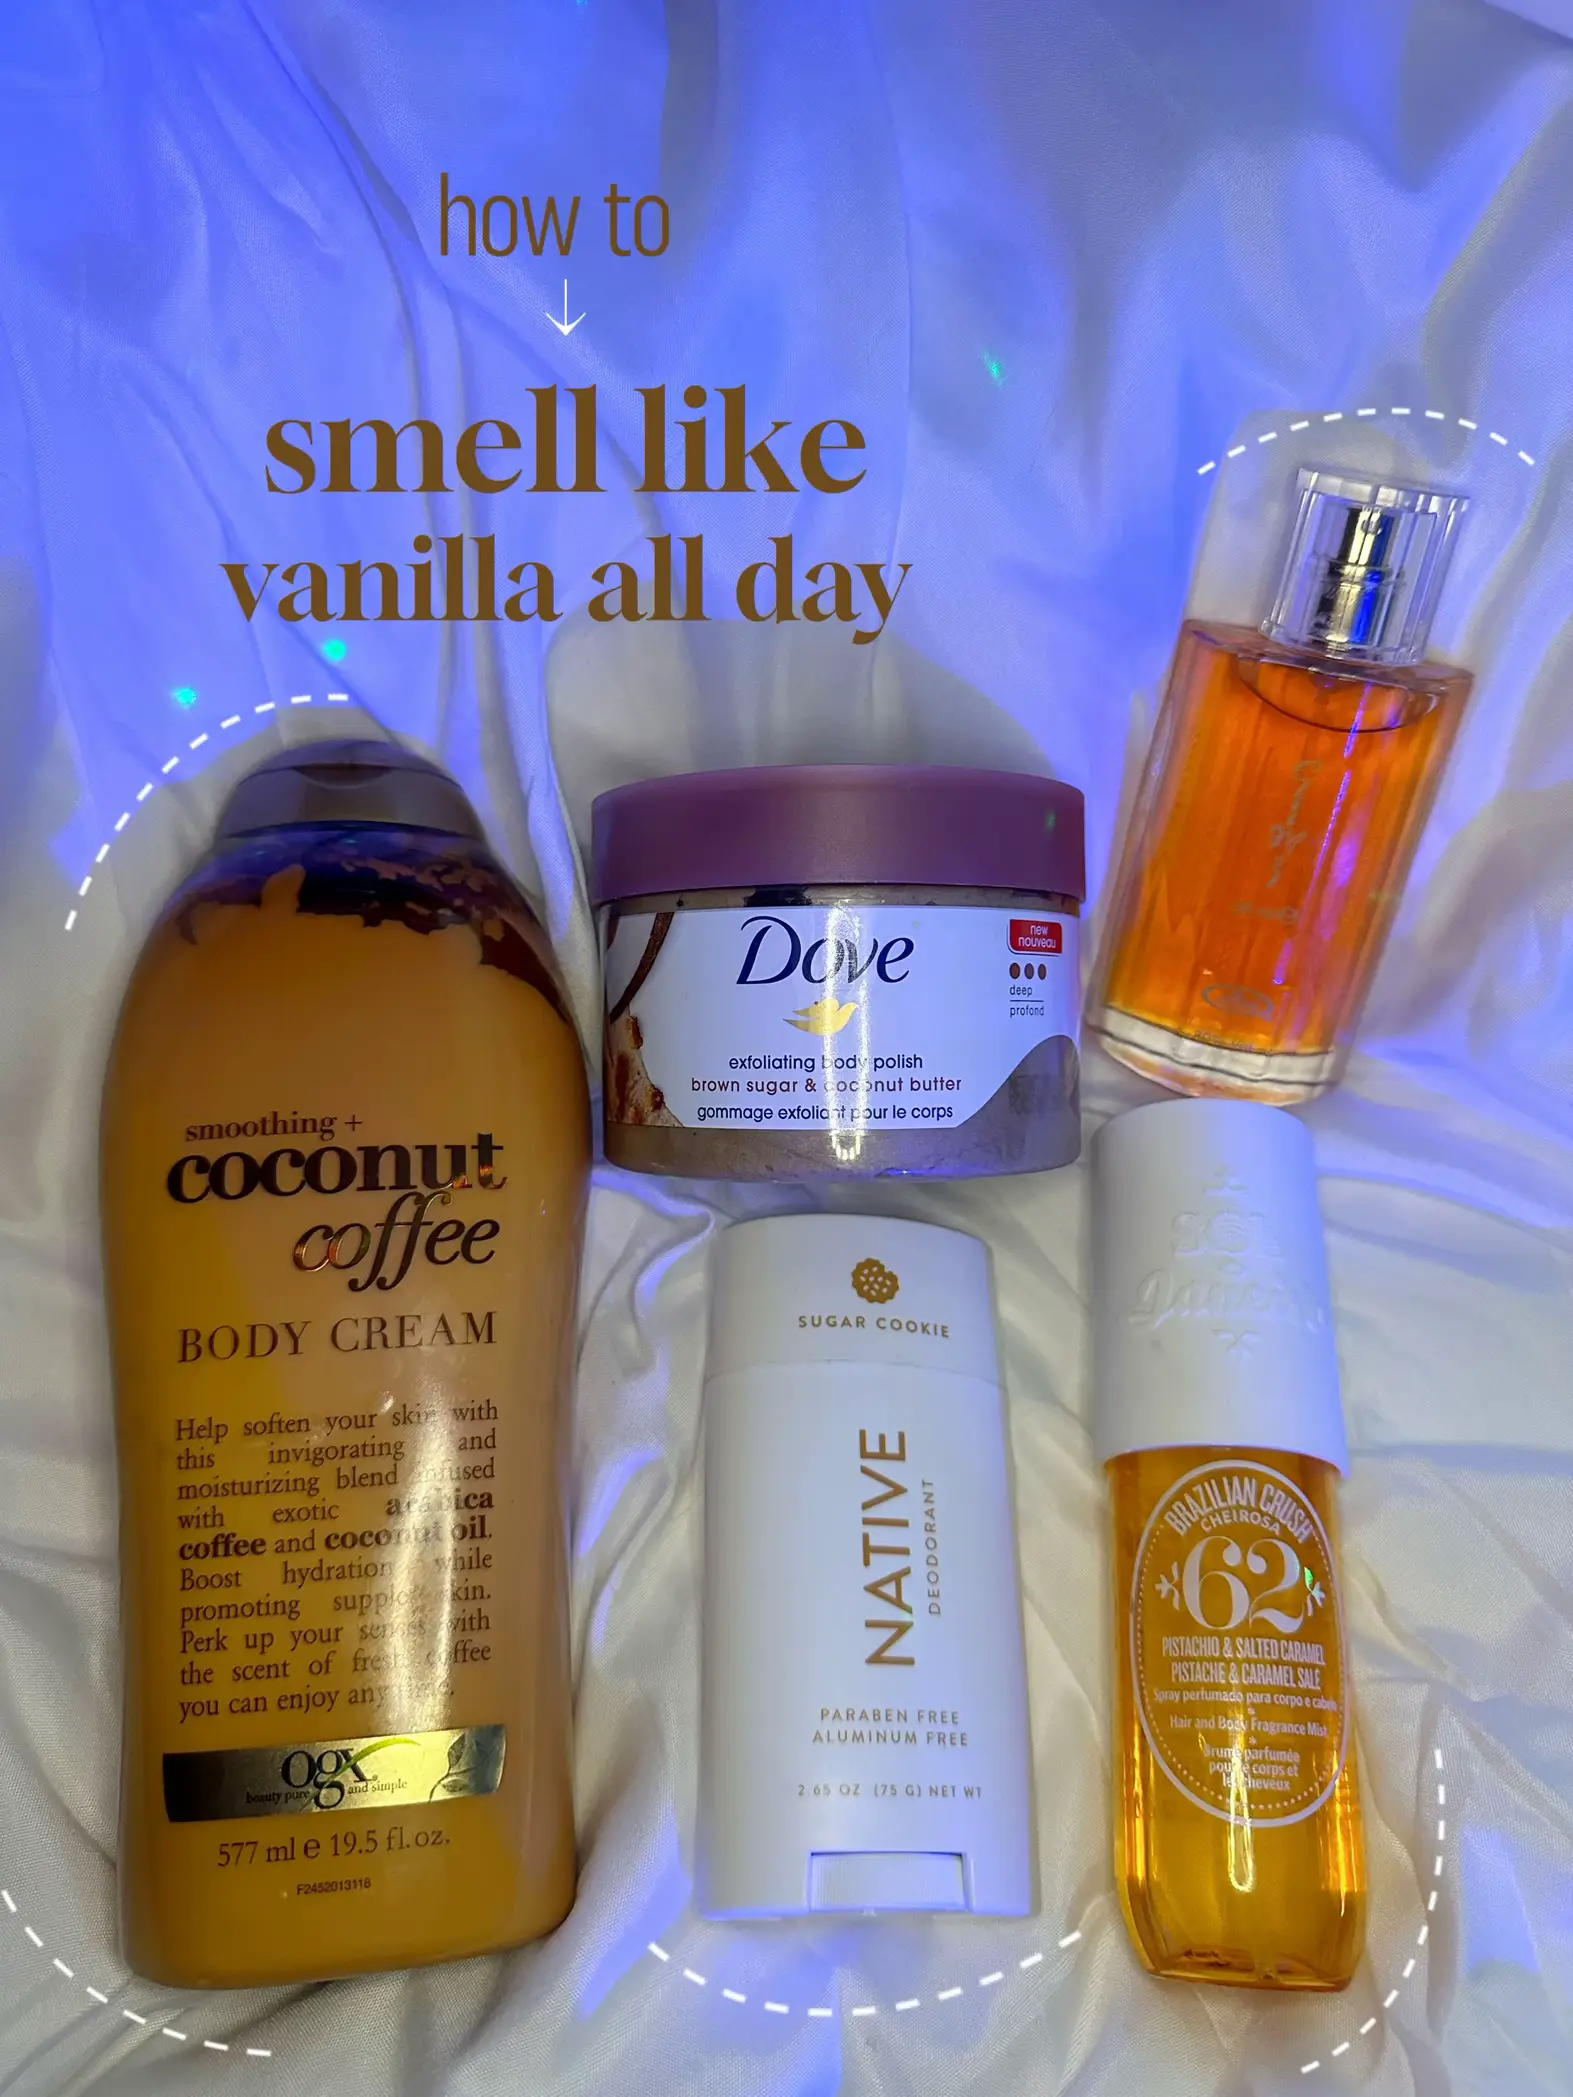 how to smell like vanilla all day🍨, Gallery posted by makenzie